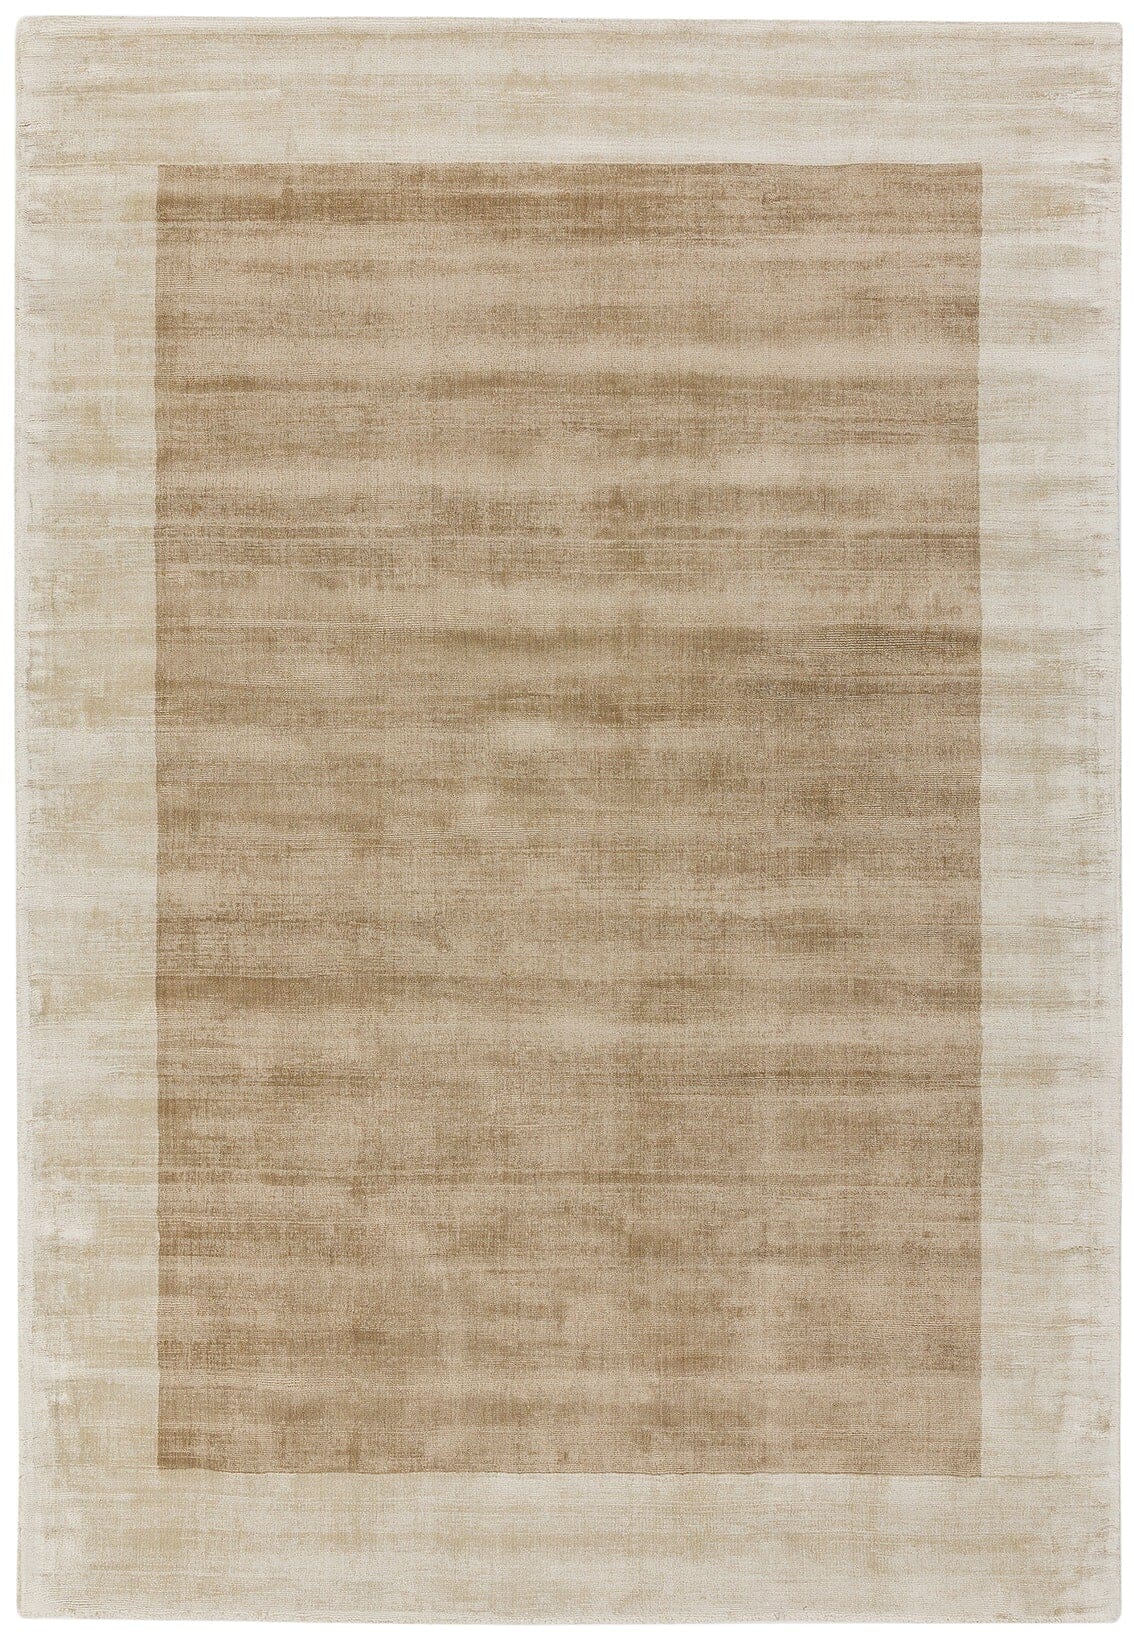 Asiatic Carpets Blade Hand Woven Rug Putty Champagne - 160 x 230cm